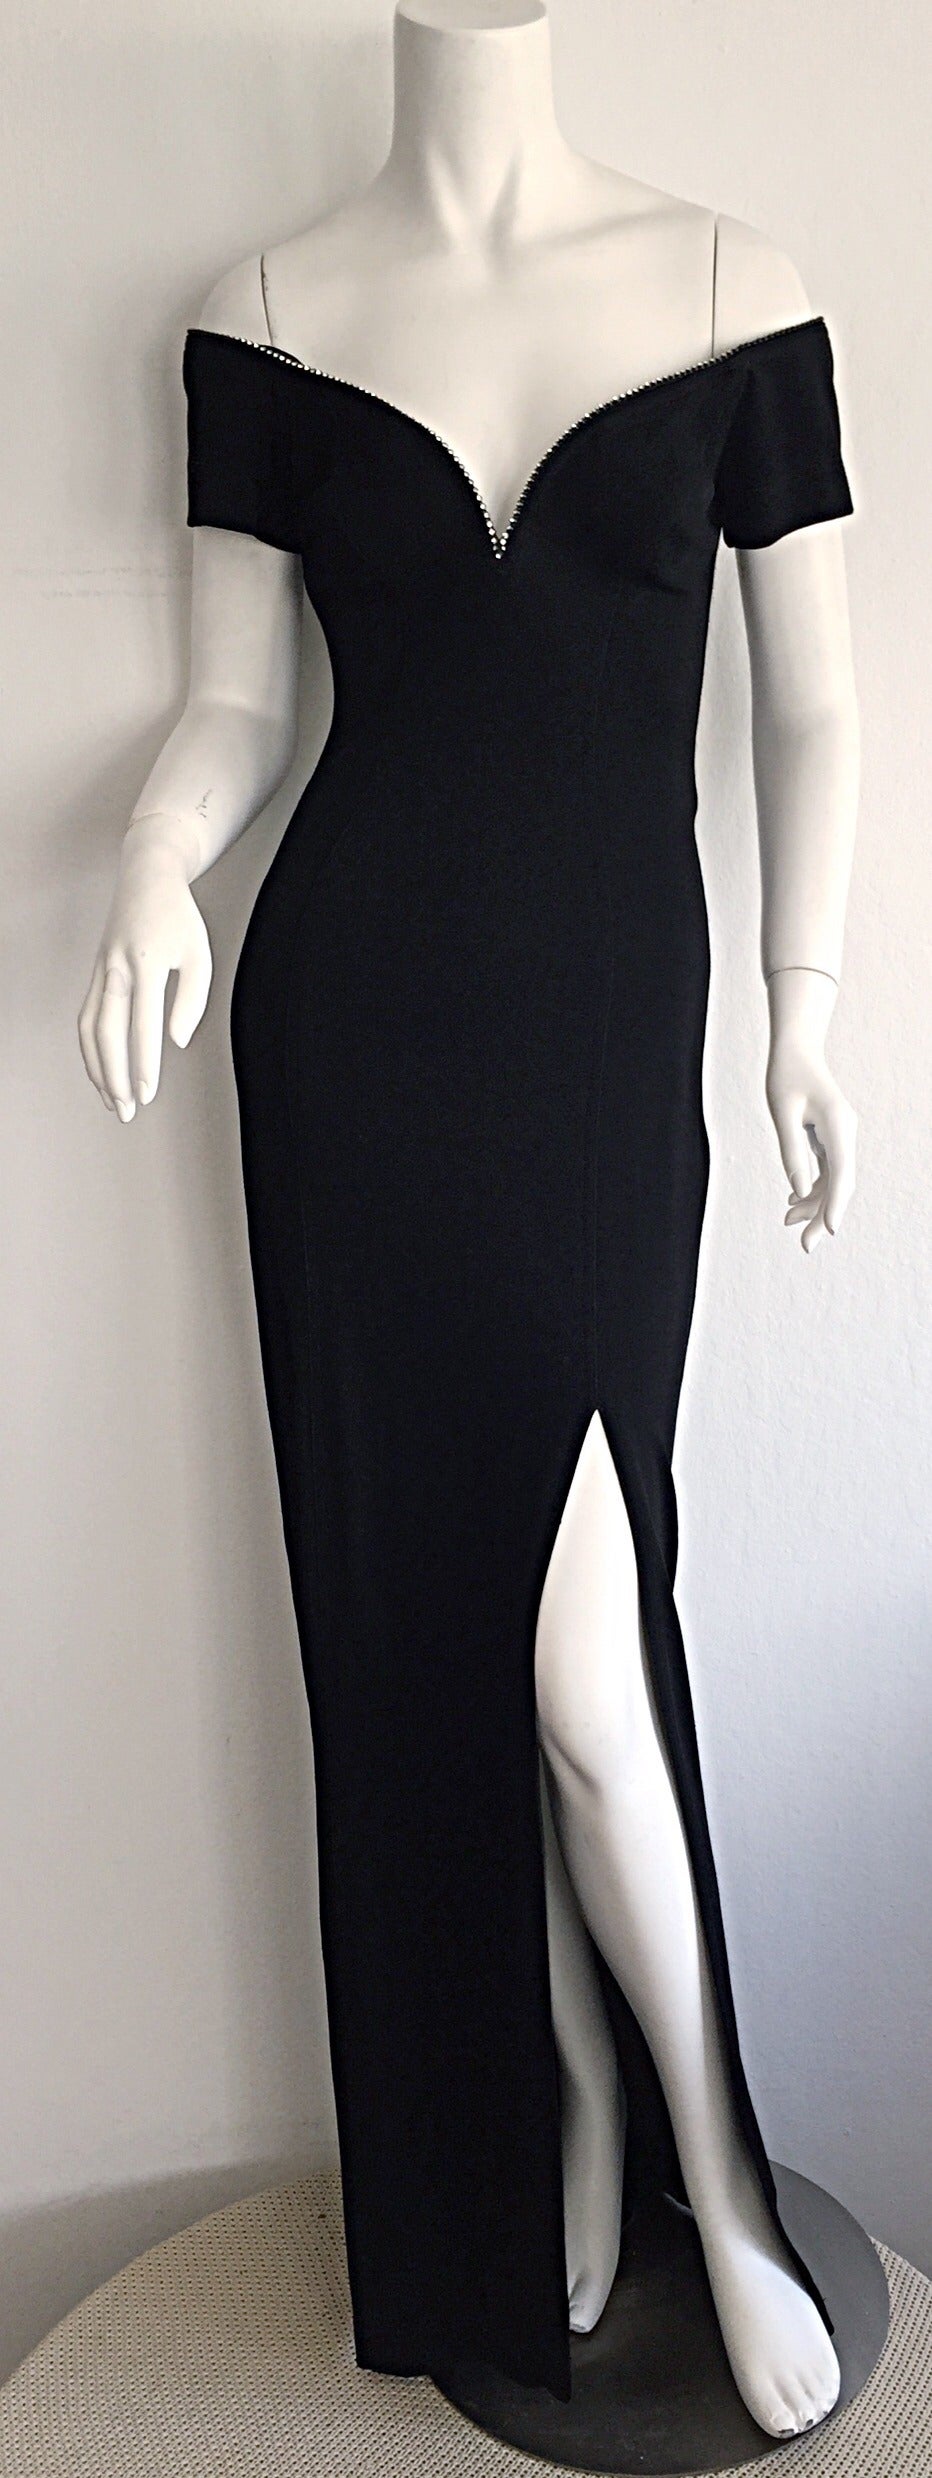 Sexiest vintage Tadashi Shoji black gown! Stretch jersey material. Perfect slit up the side. Rhinestones around bust, and at back neck. A true stunner! In great condition. Approximately Size Small-Medium

Measurements:
34-40 inch bust
26-32 inch